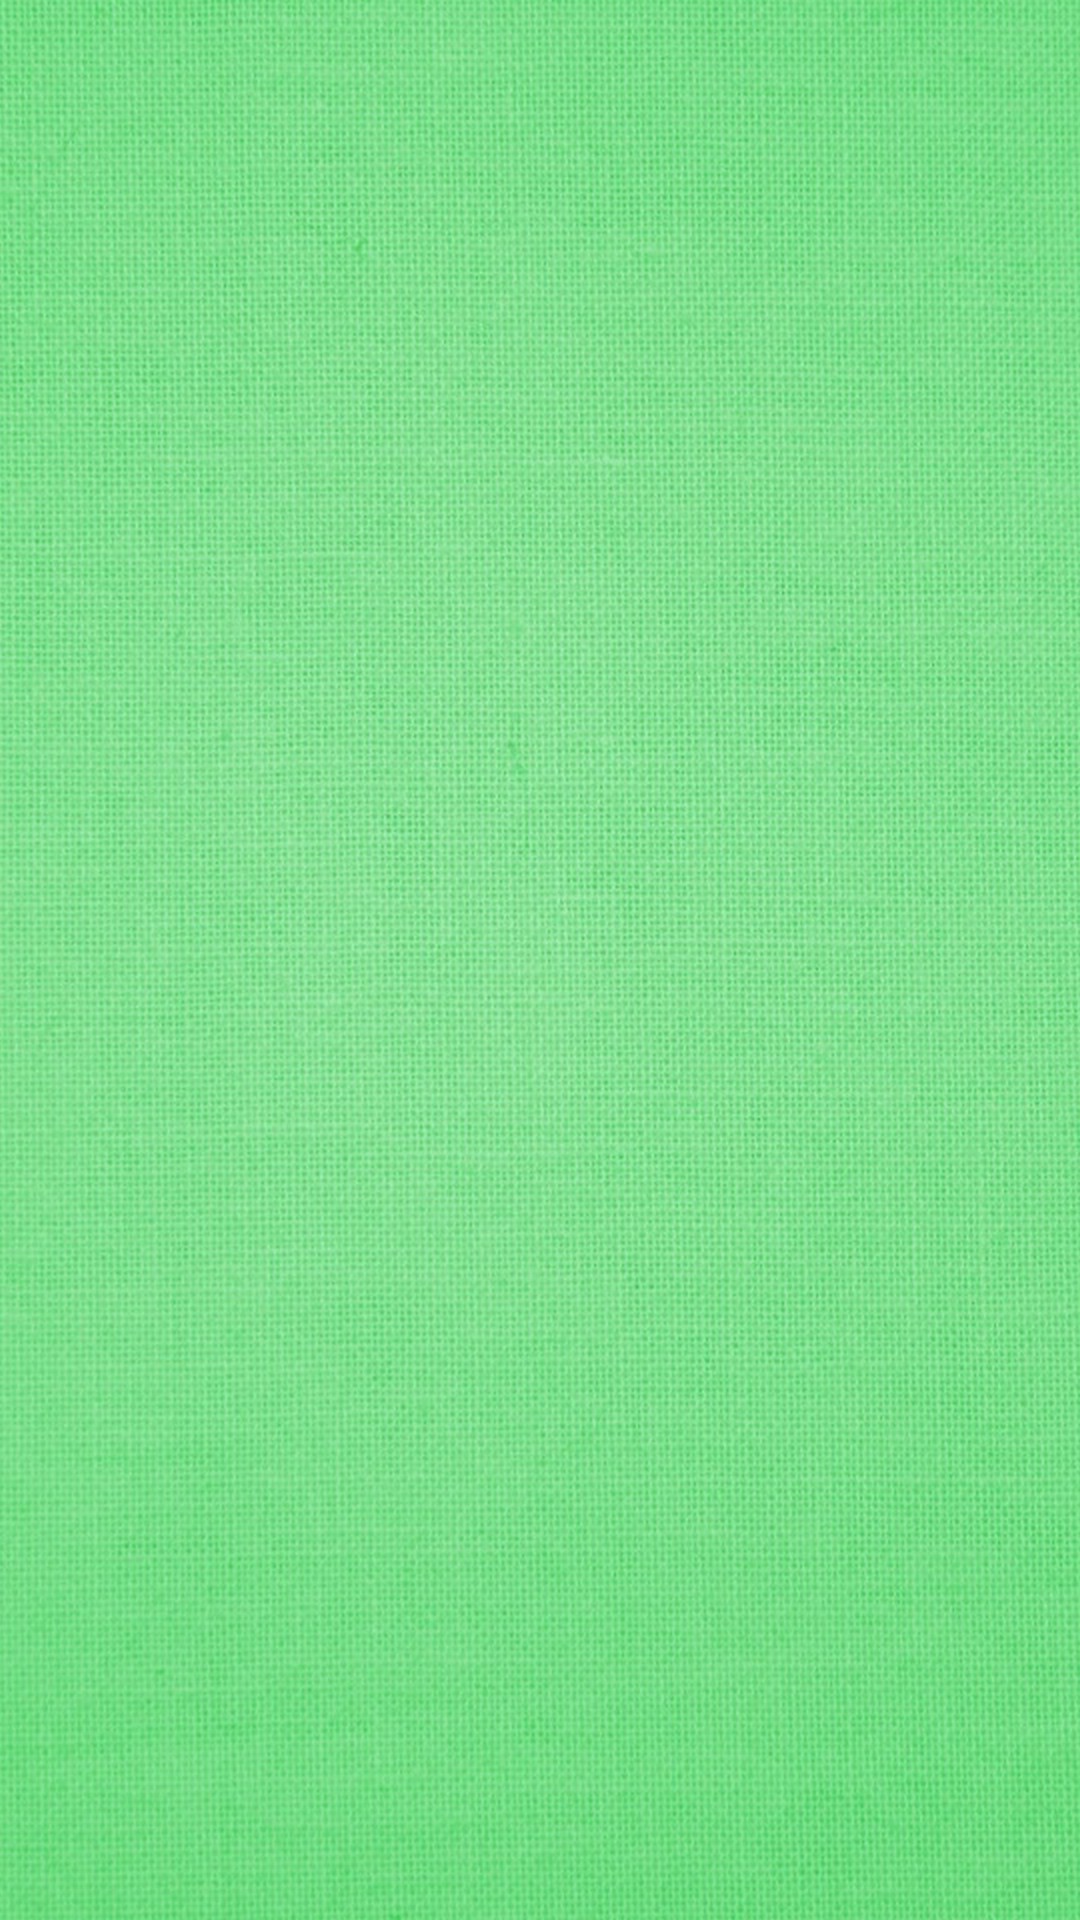 Green iPhone 7 Plus Wallpaper with image resolution 1080x1920 pixel. You can make this wallpaper for your Desktop Computer Backgrounds, Mac Wallpapers, Android Lock screen or iPhone Screensavers